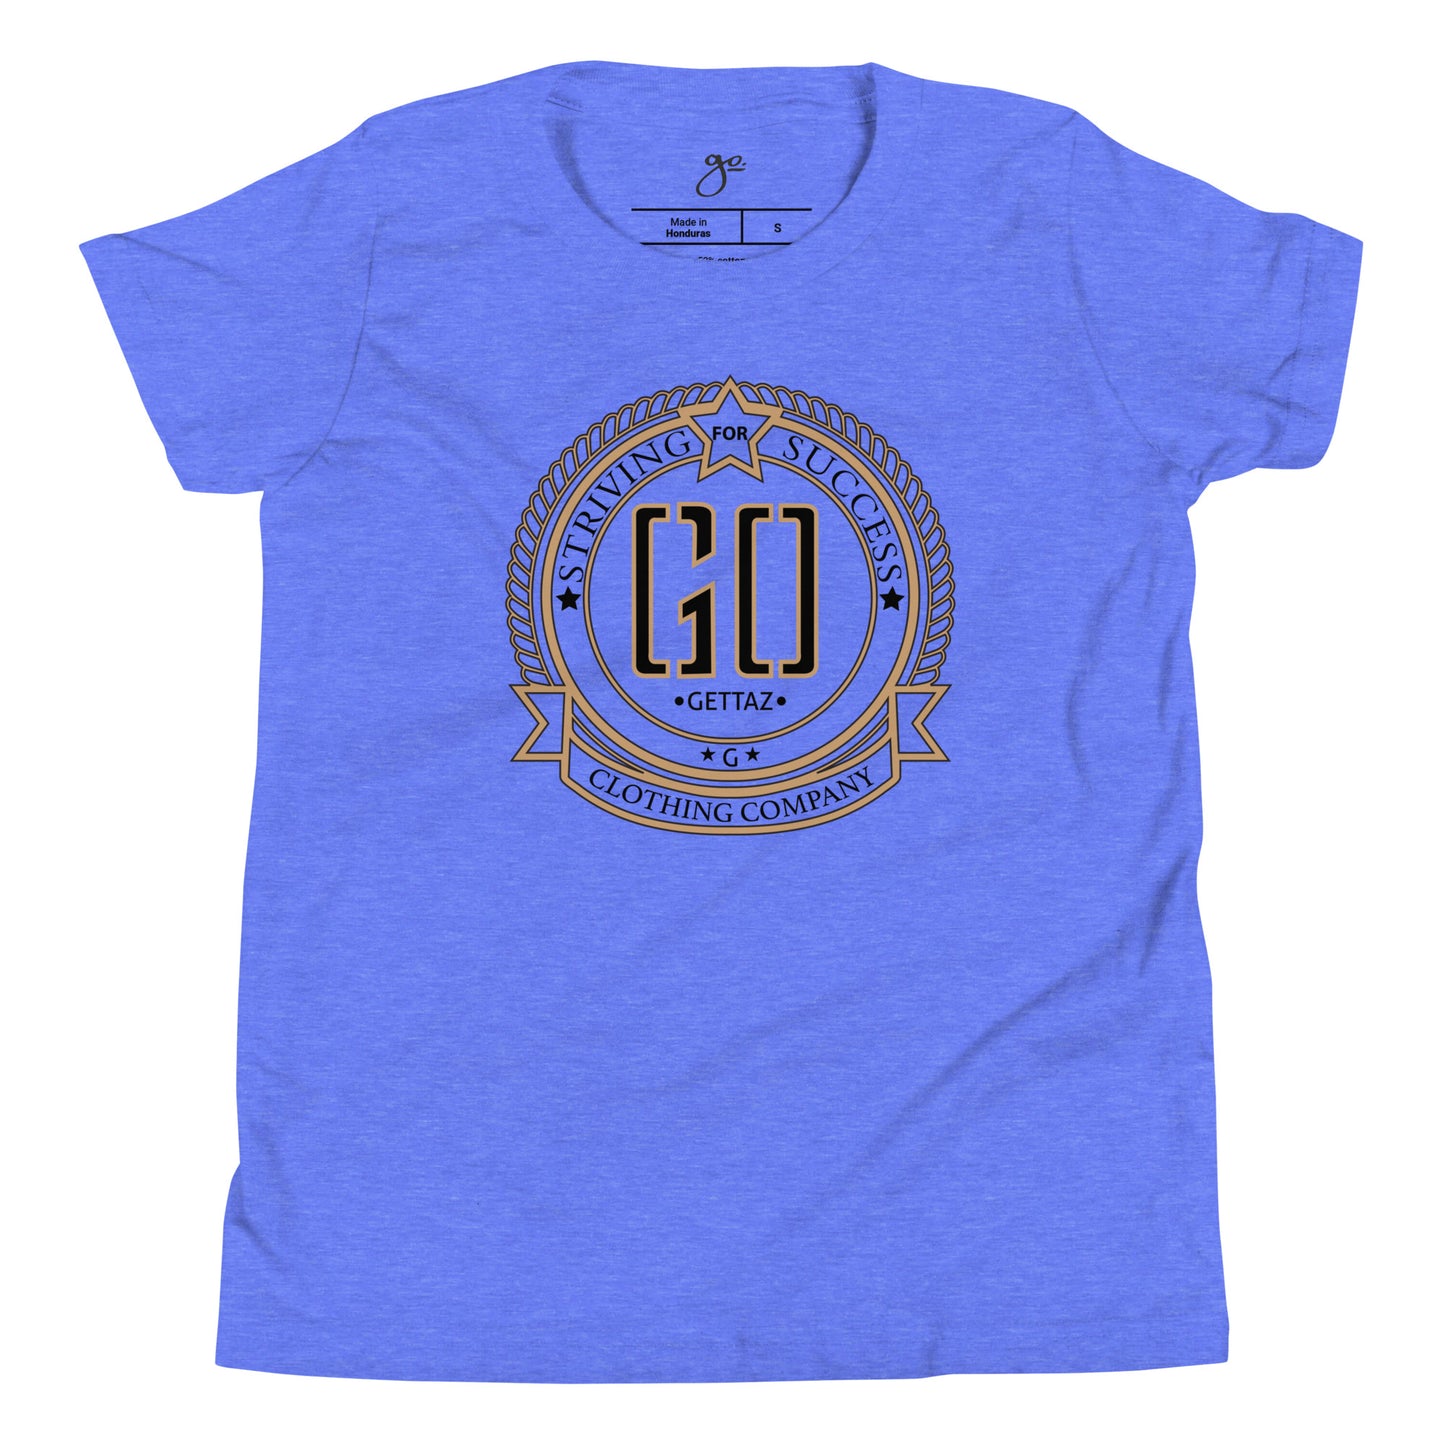 Go. Success Youth T-Shirt